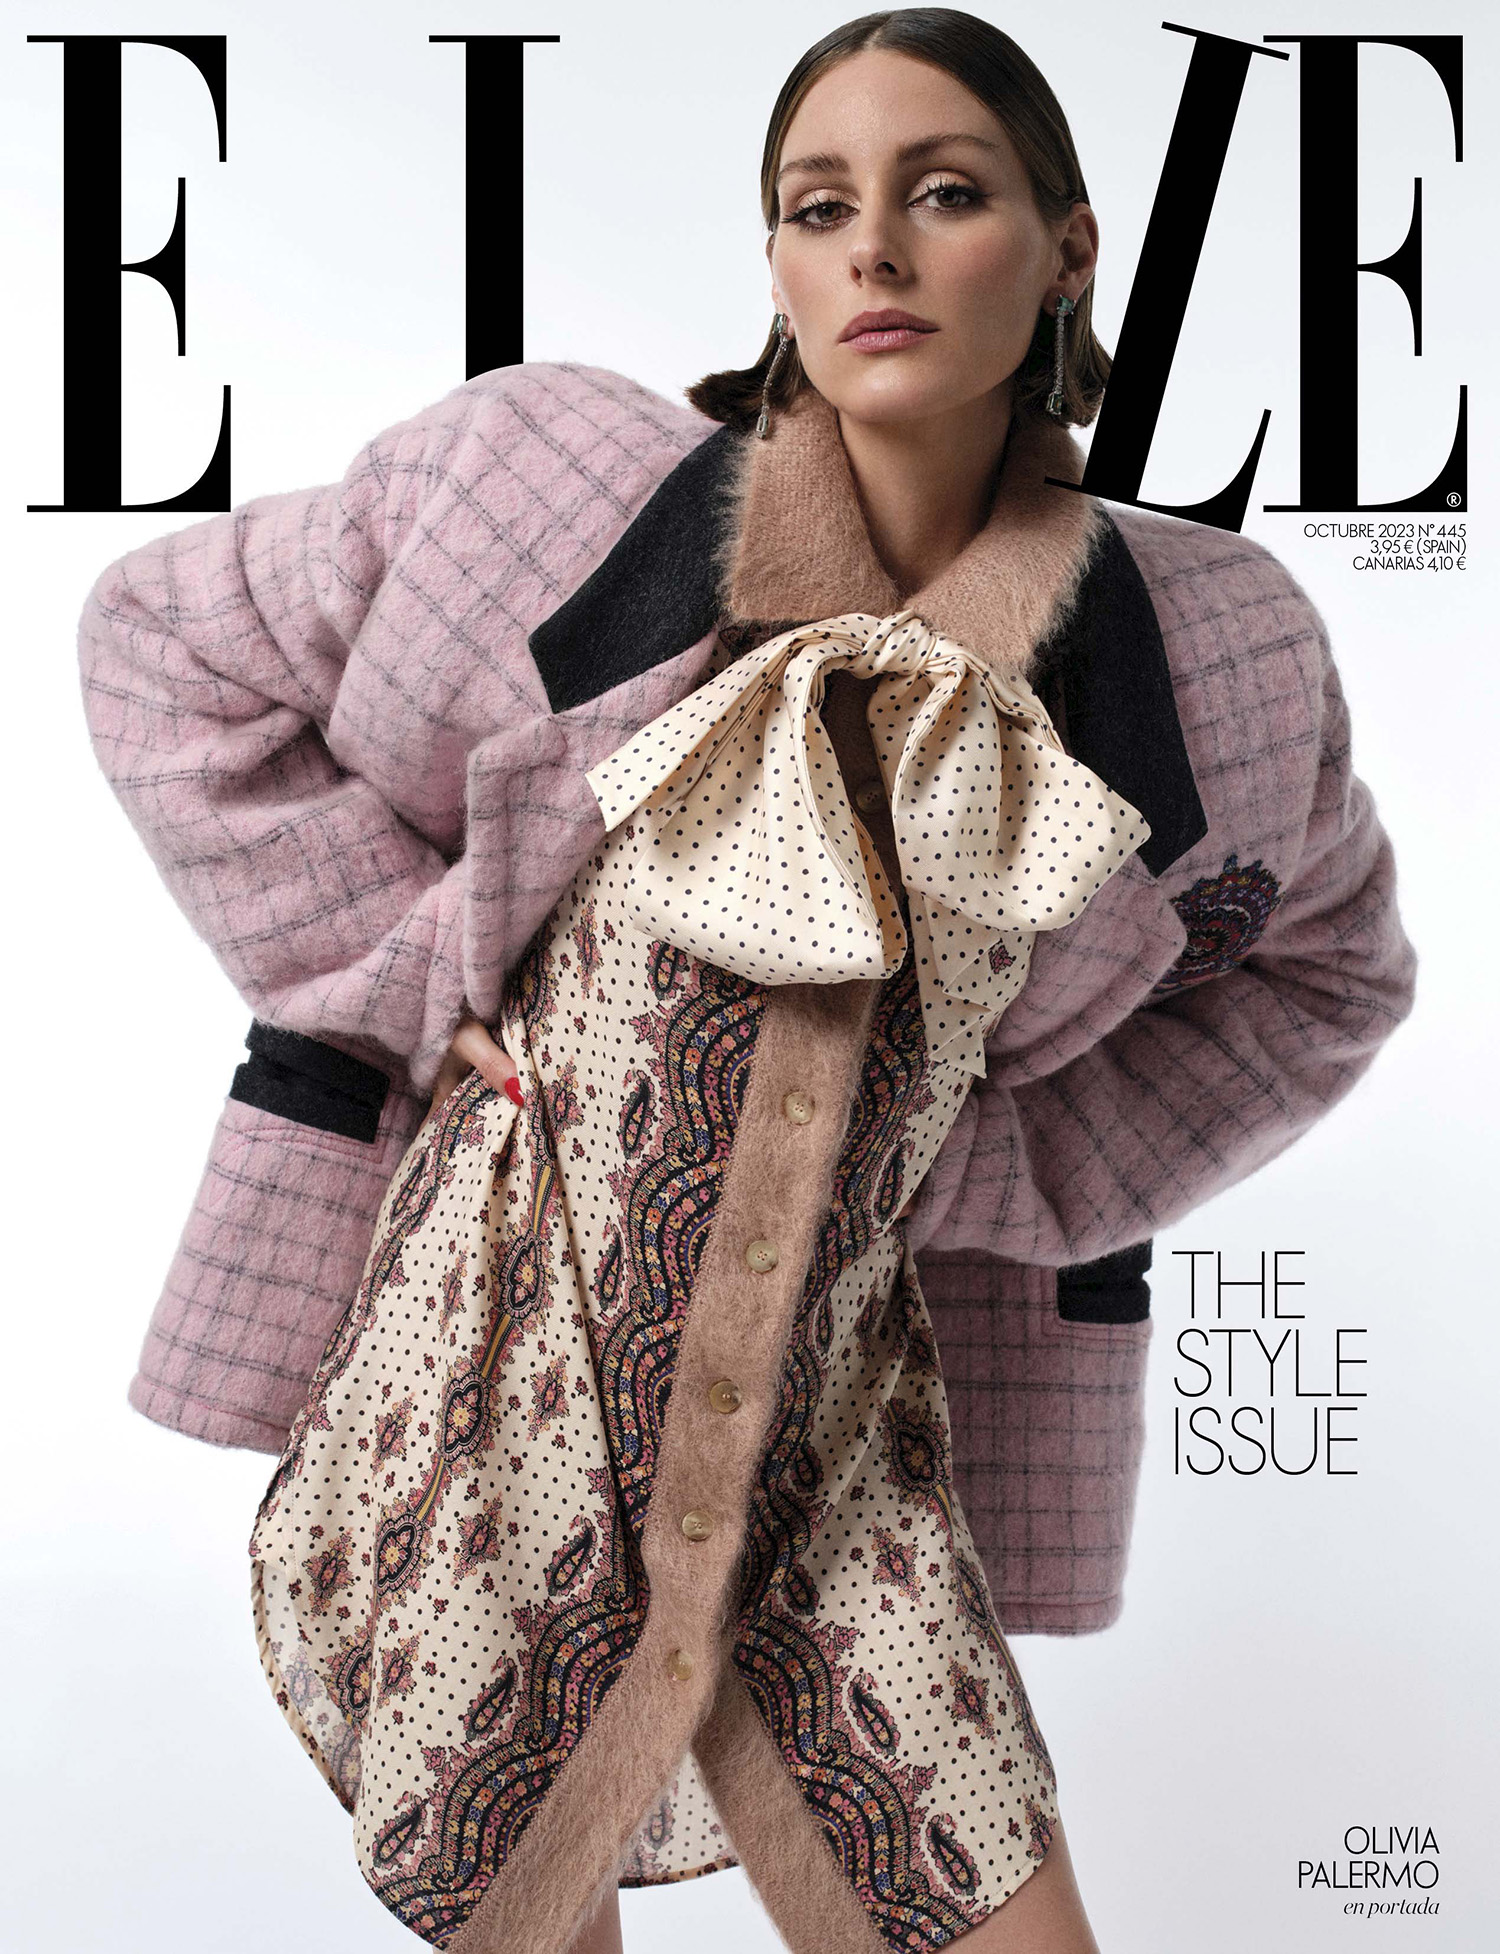 Olivia Palermo covers Elle Spain October 2023 by Javier Lopez